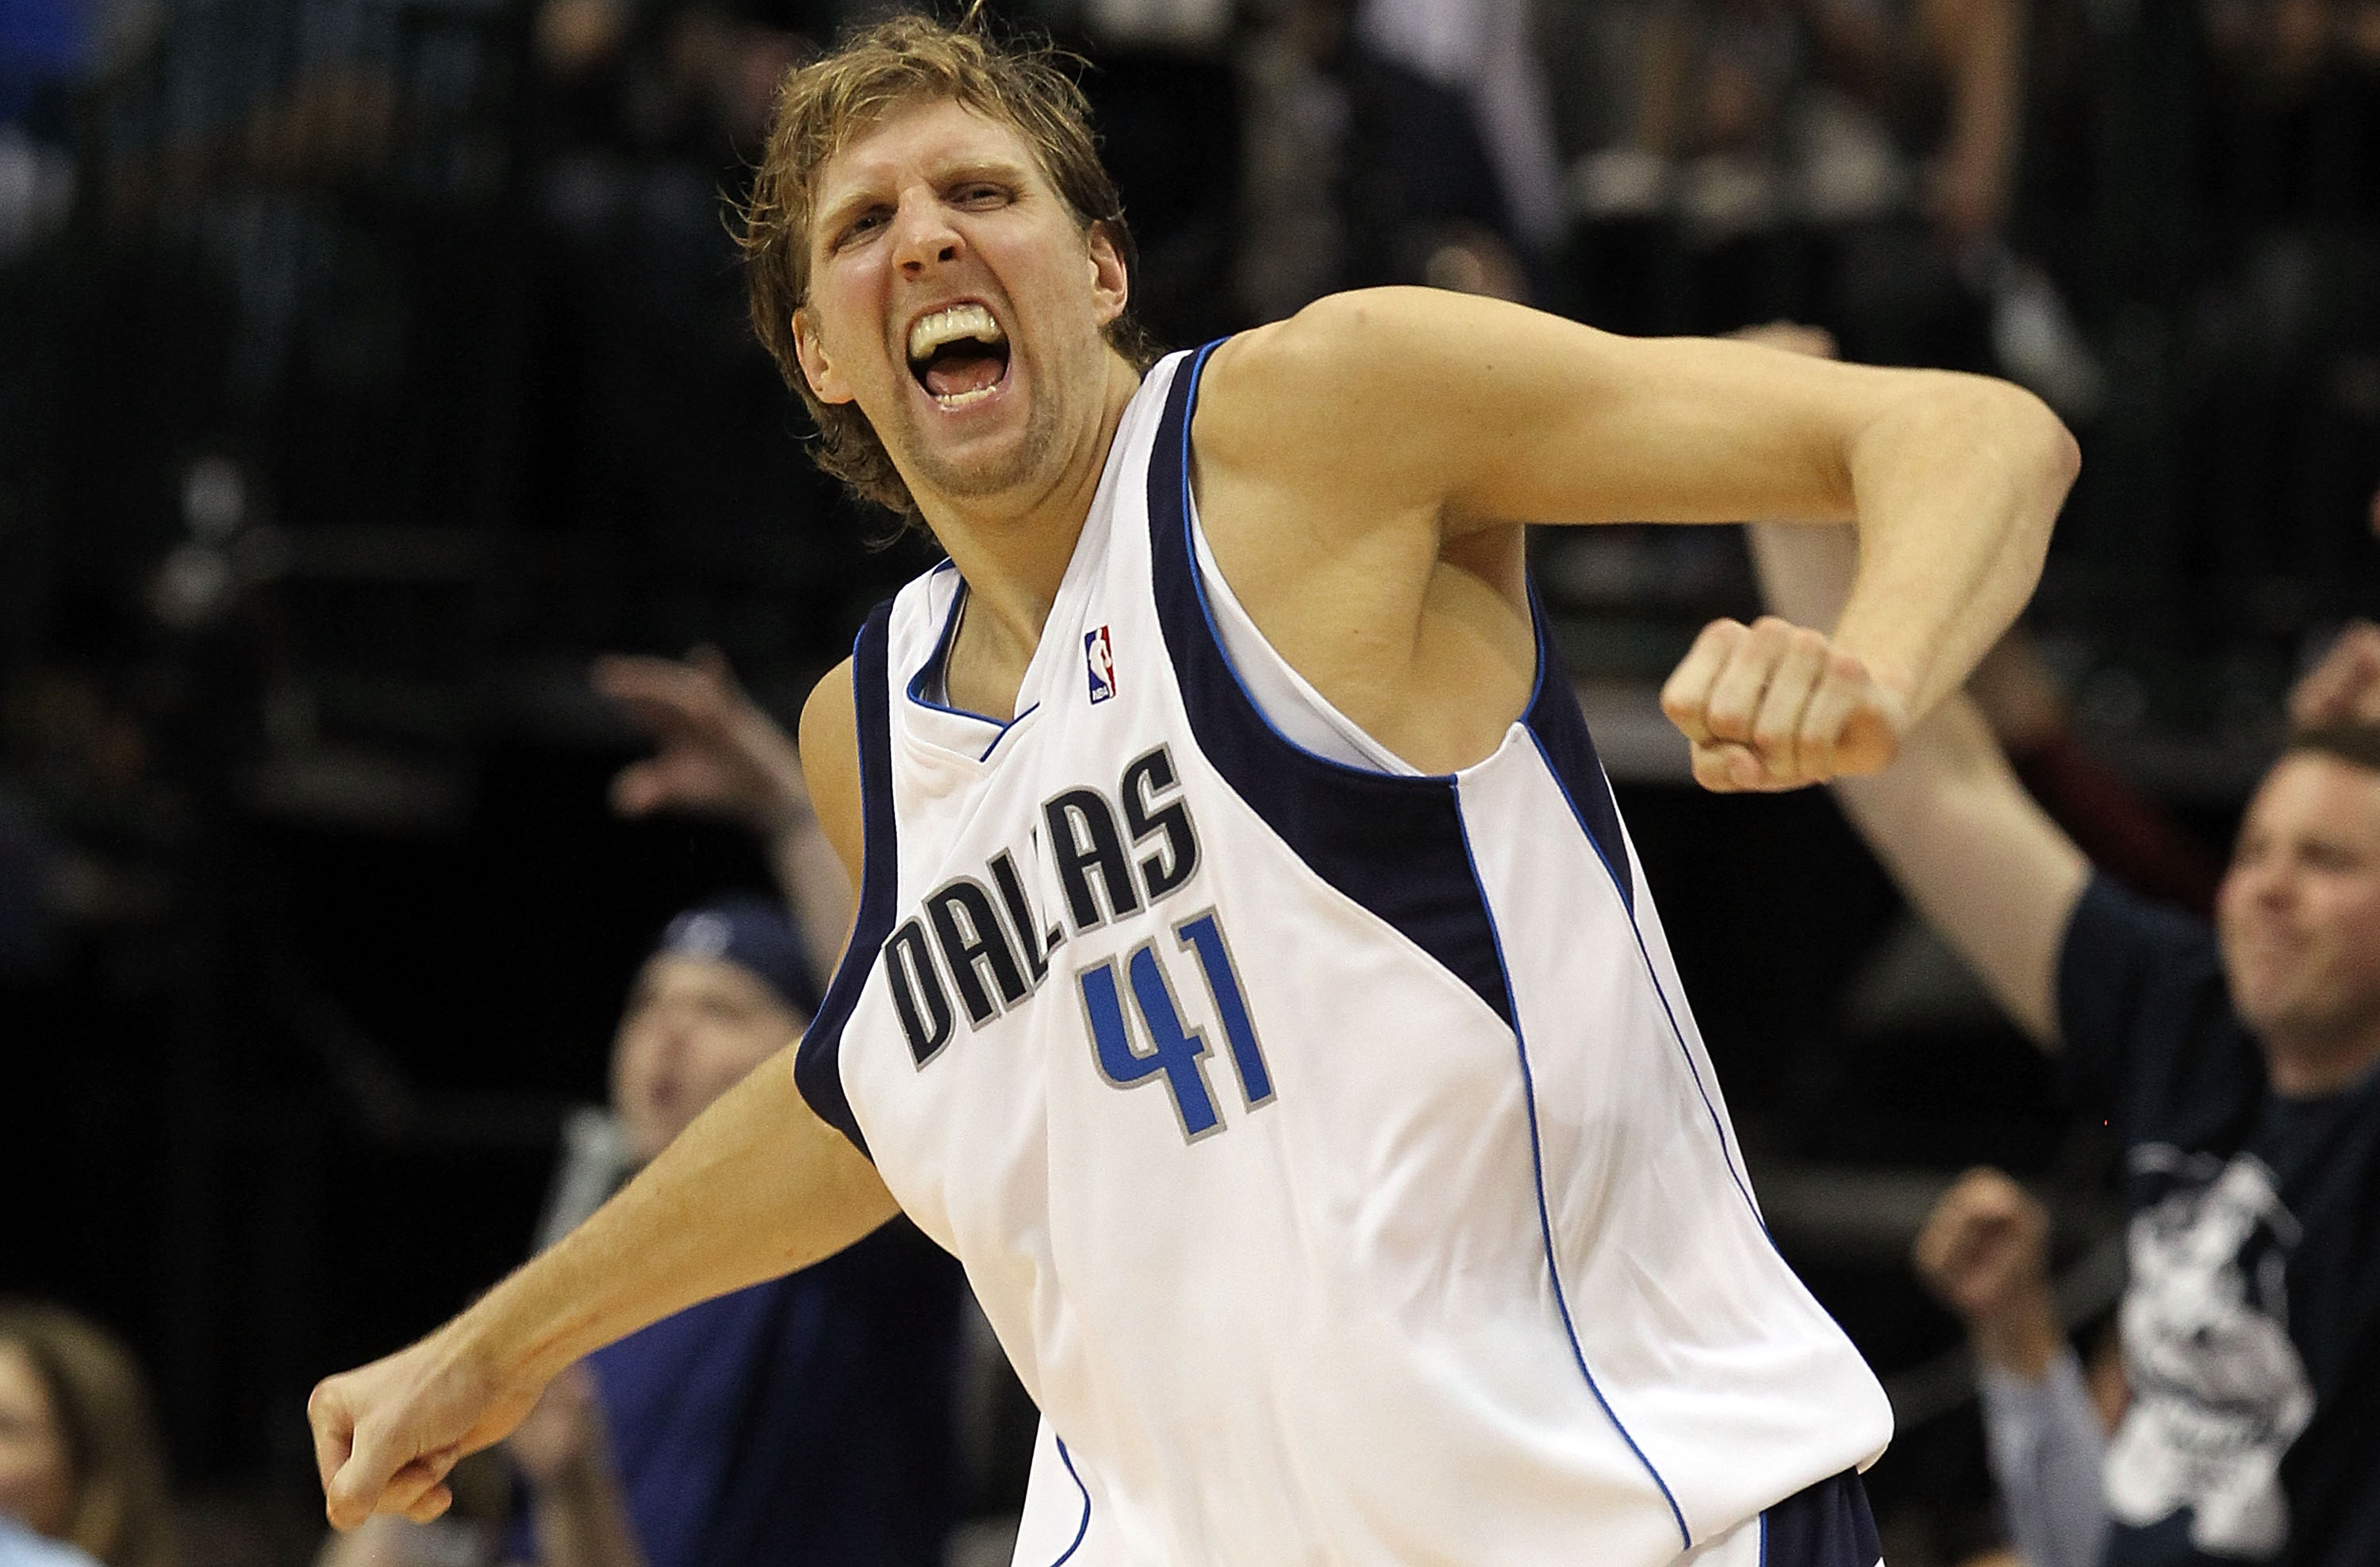 DALLAS - APRIL 18:  Forward Dirk Nowitzki #41 of the Dallas Mavericks reacts during play against the San Antonio Spurs in Game One of the Western Conference Quarterfinals during the 2010 NBA Playoffs at American Airlines Center on April 18, 2010 in Dallas